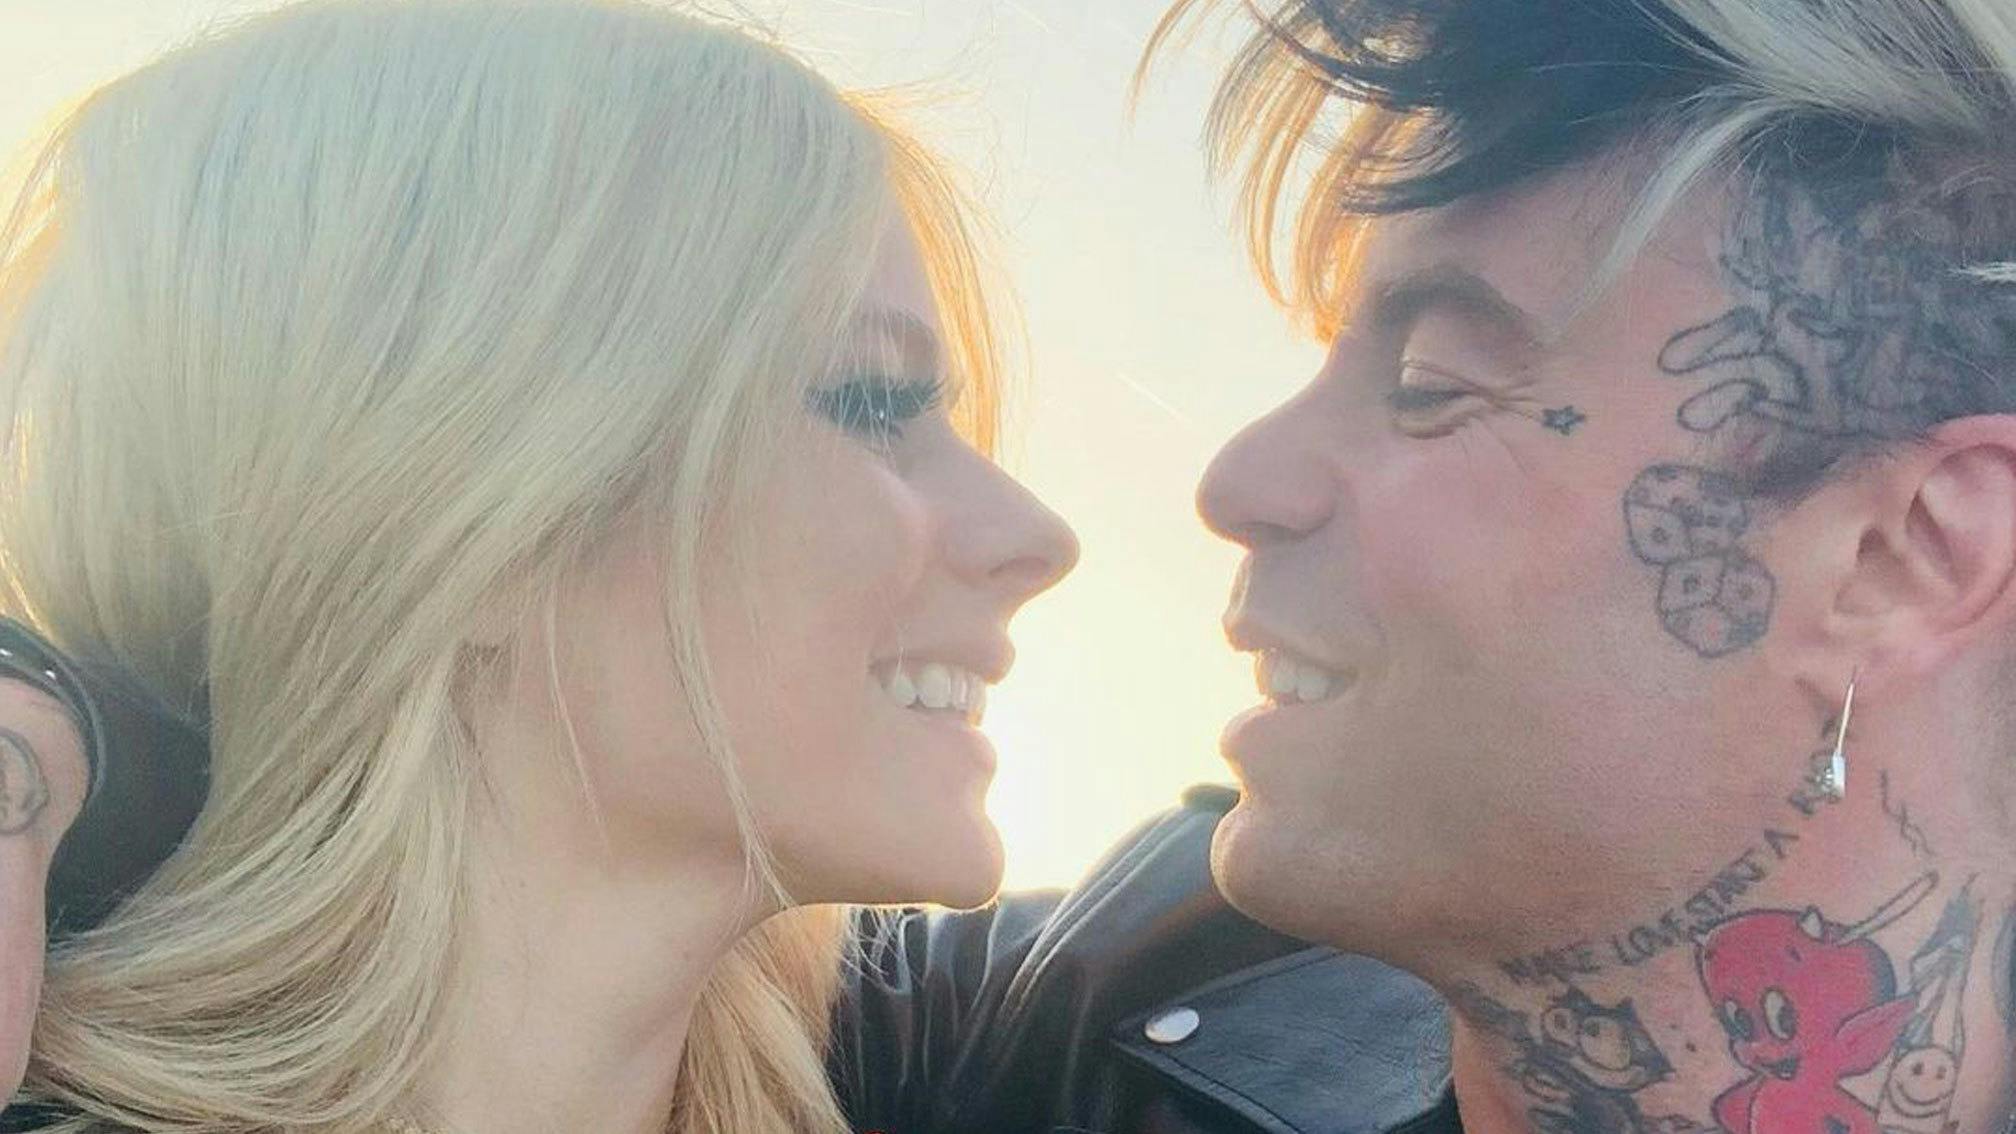 Avril Lavigne and MOD SUN get engaged in Paris: “It felt like time stood still”